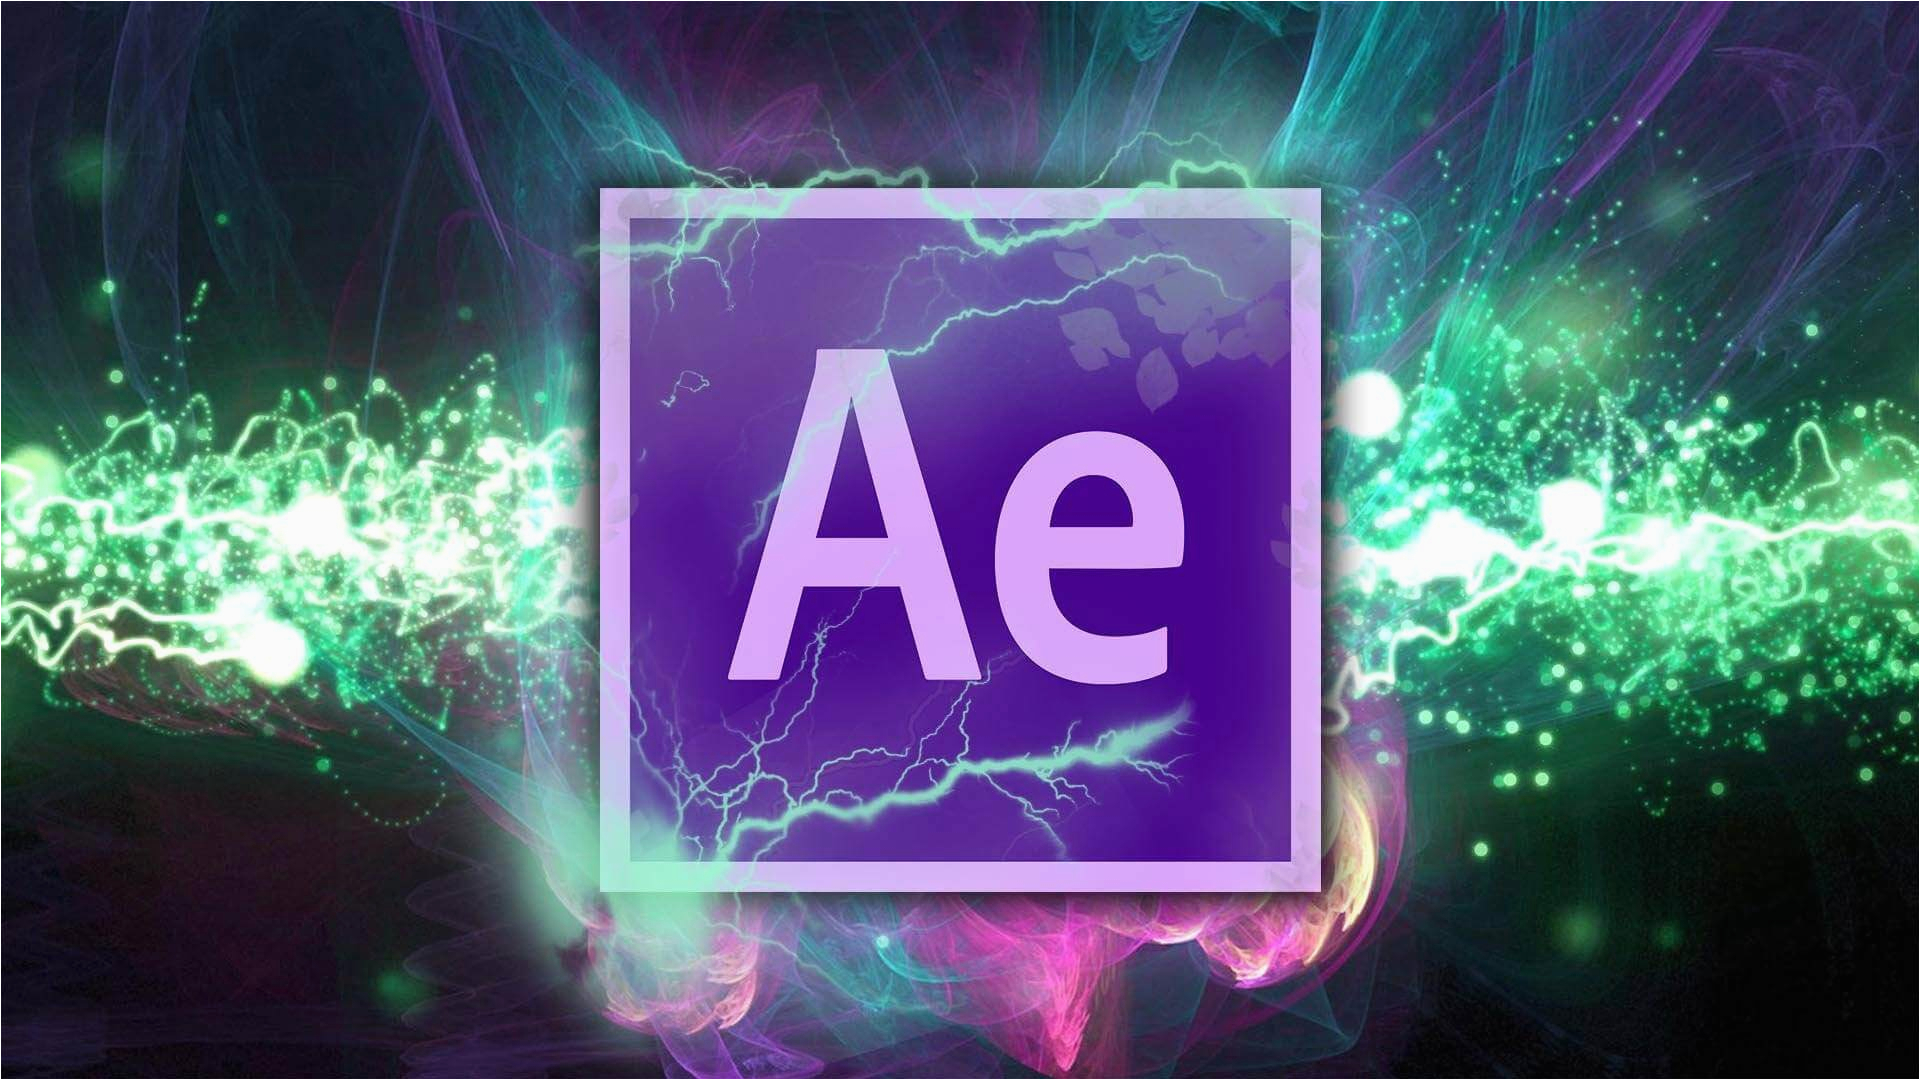 free after effects templates